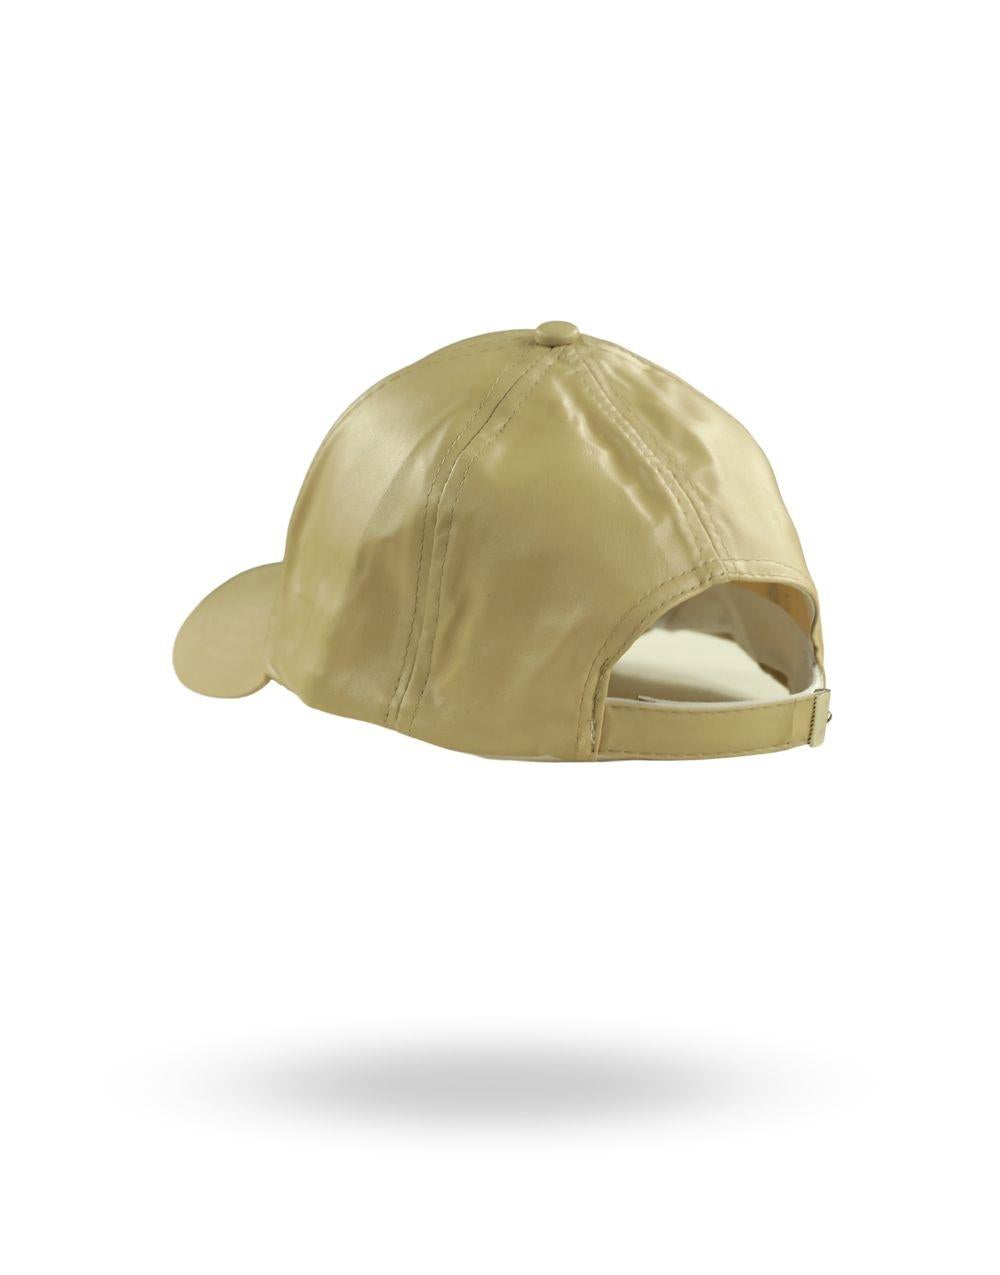 Basic Street Style Hat Mad Beige - STREETMODE ™